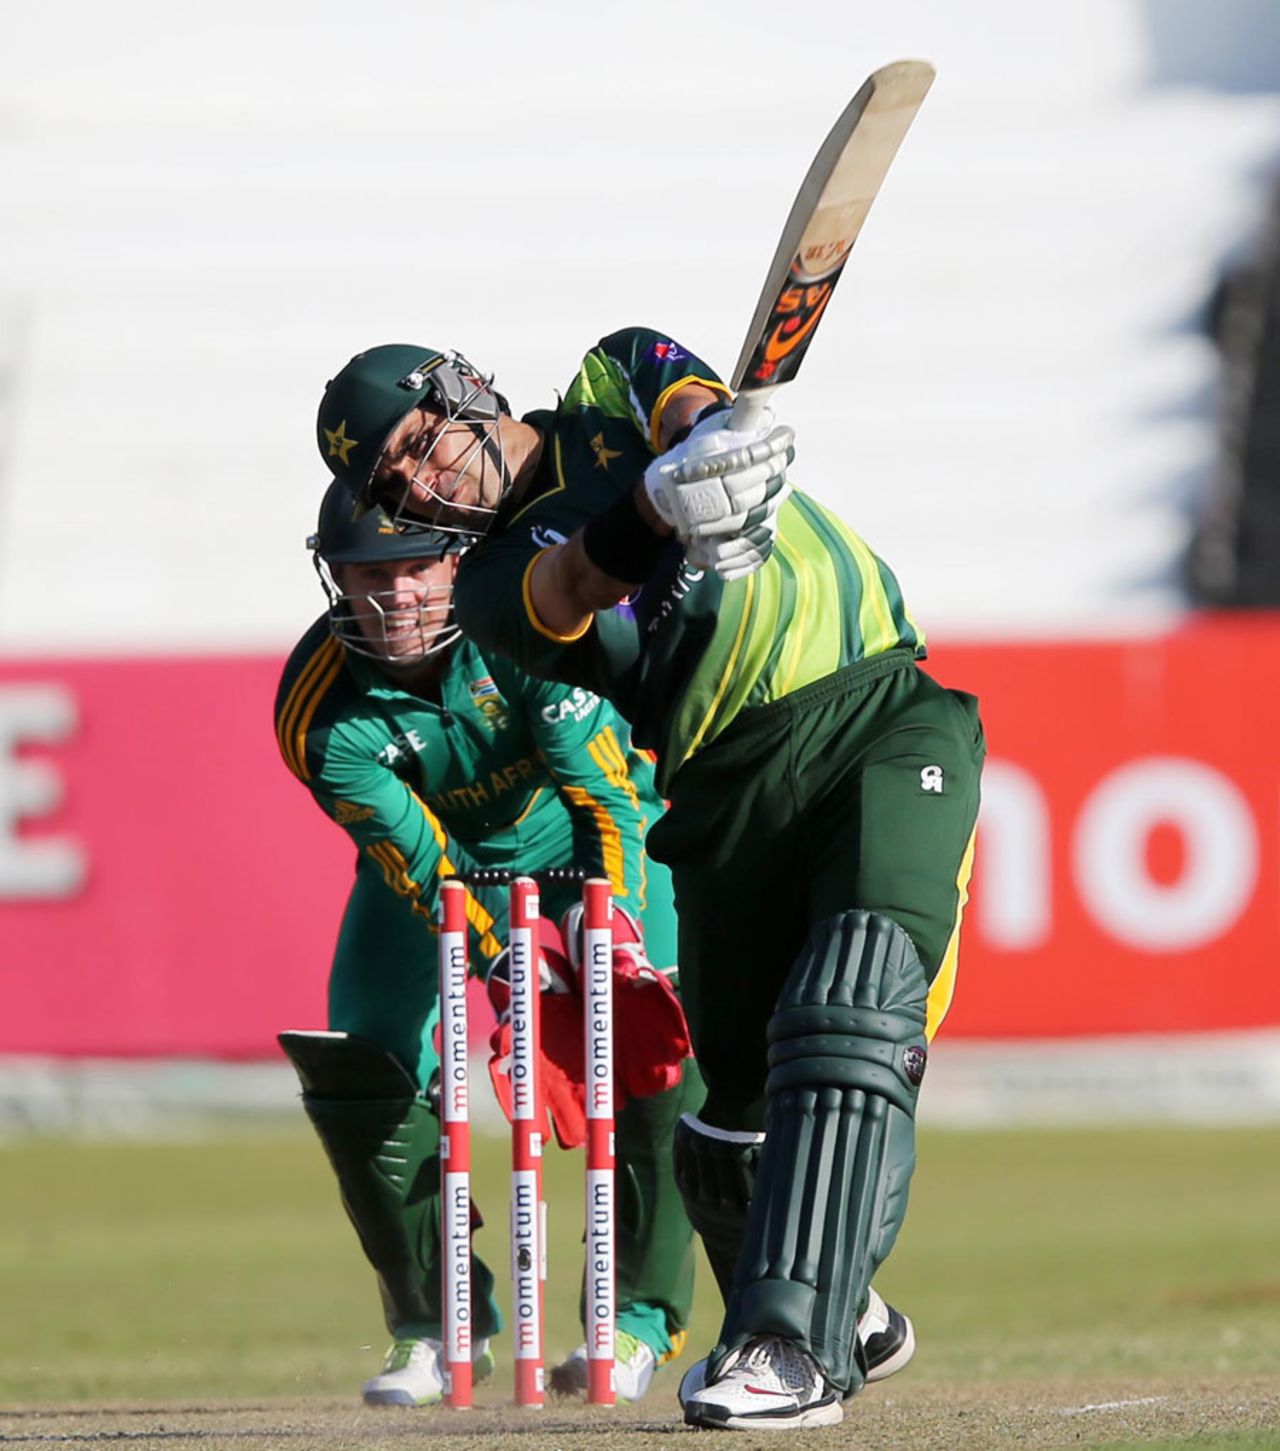 Misbah-ul-Haq launches down the ground, South Africa v Pakistan, 4th ODI, Durban, March 21, 2013